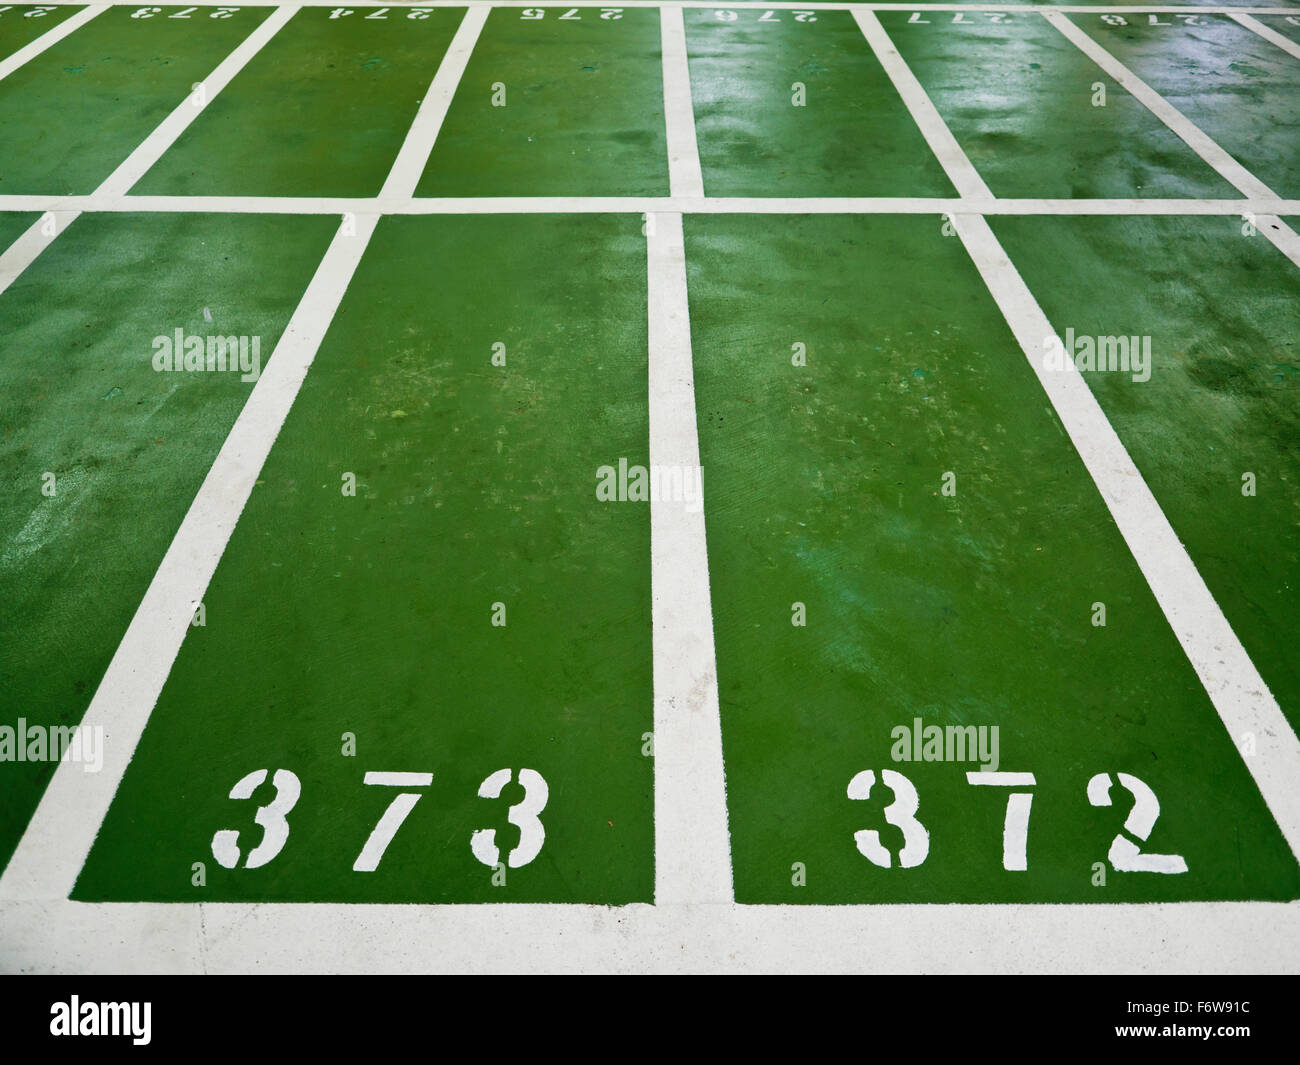 Polyurethane parking lots with numbers indoor Stock Photo